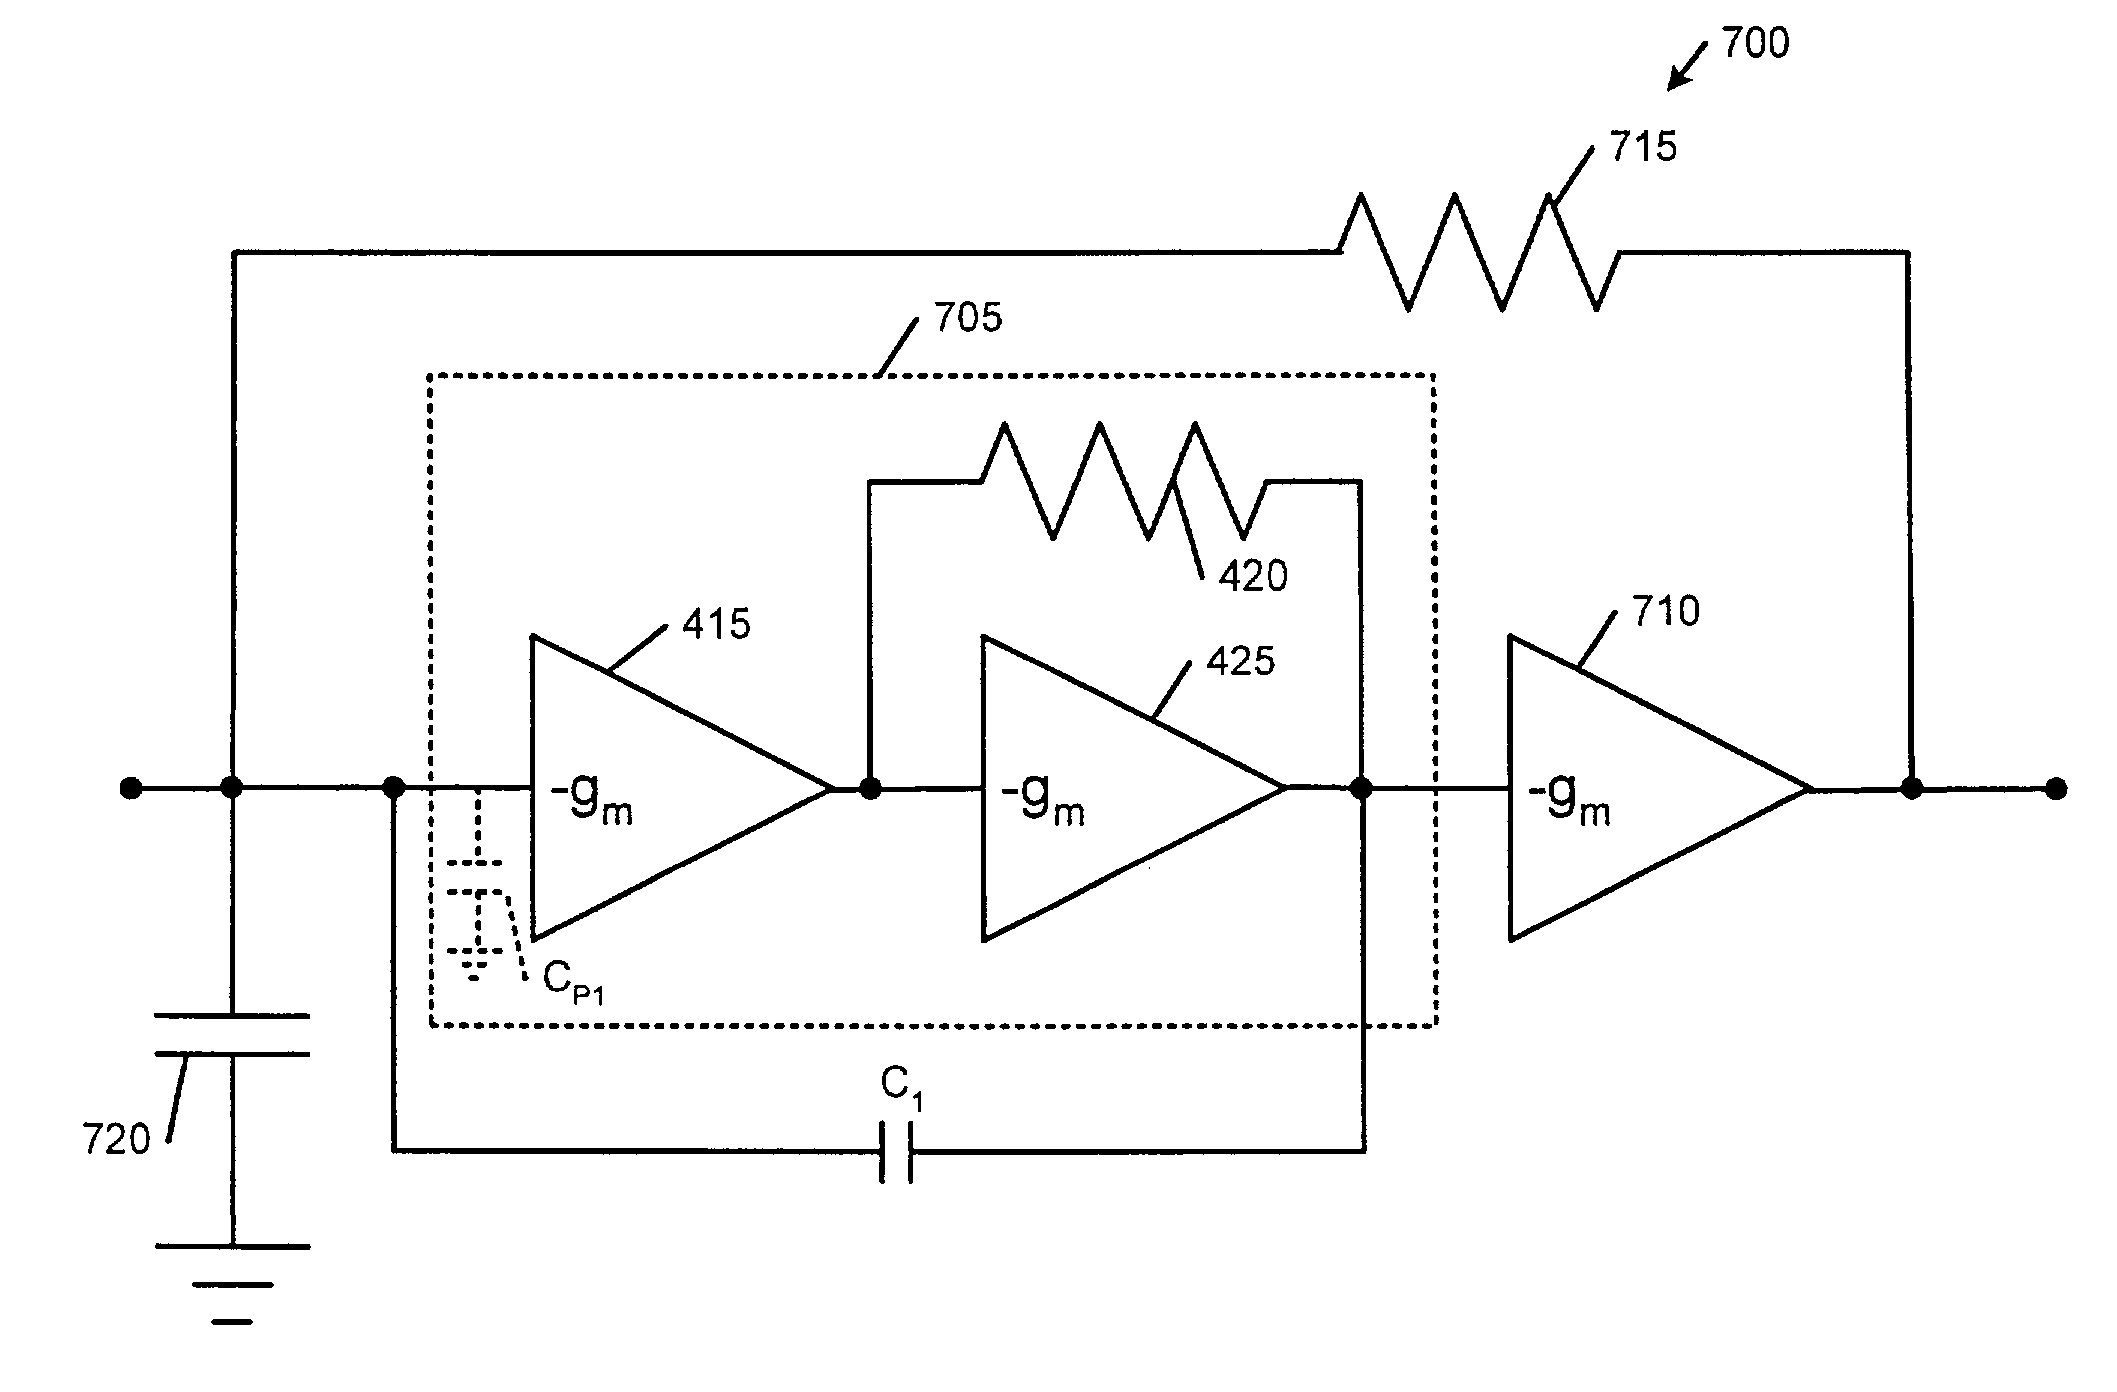 Nested transimpedance amplifier